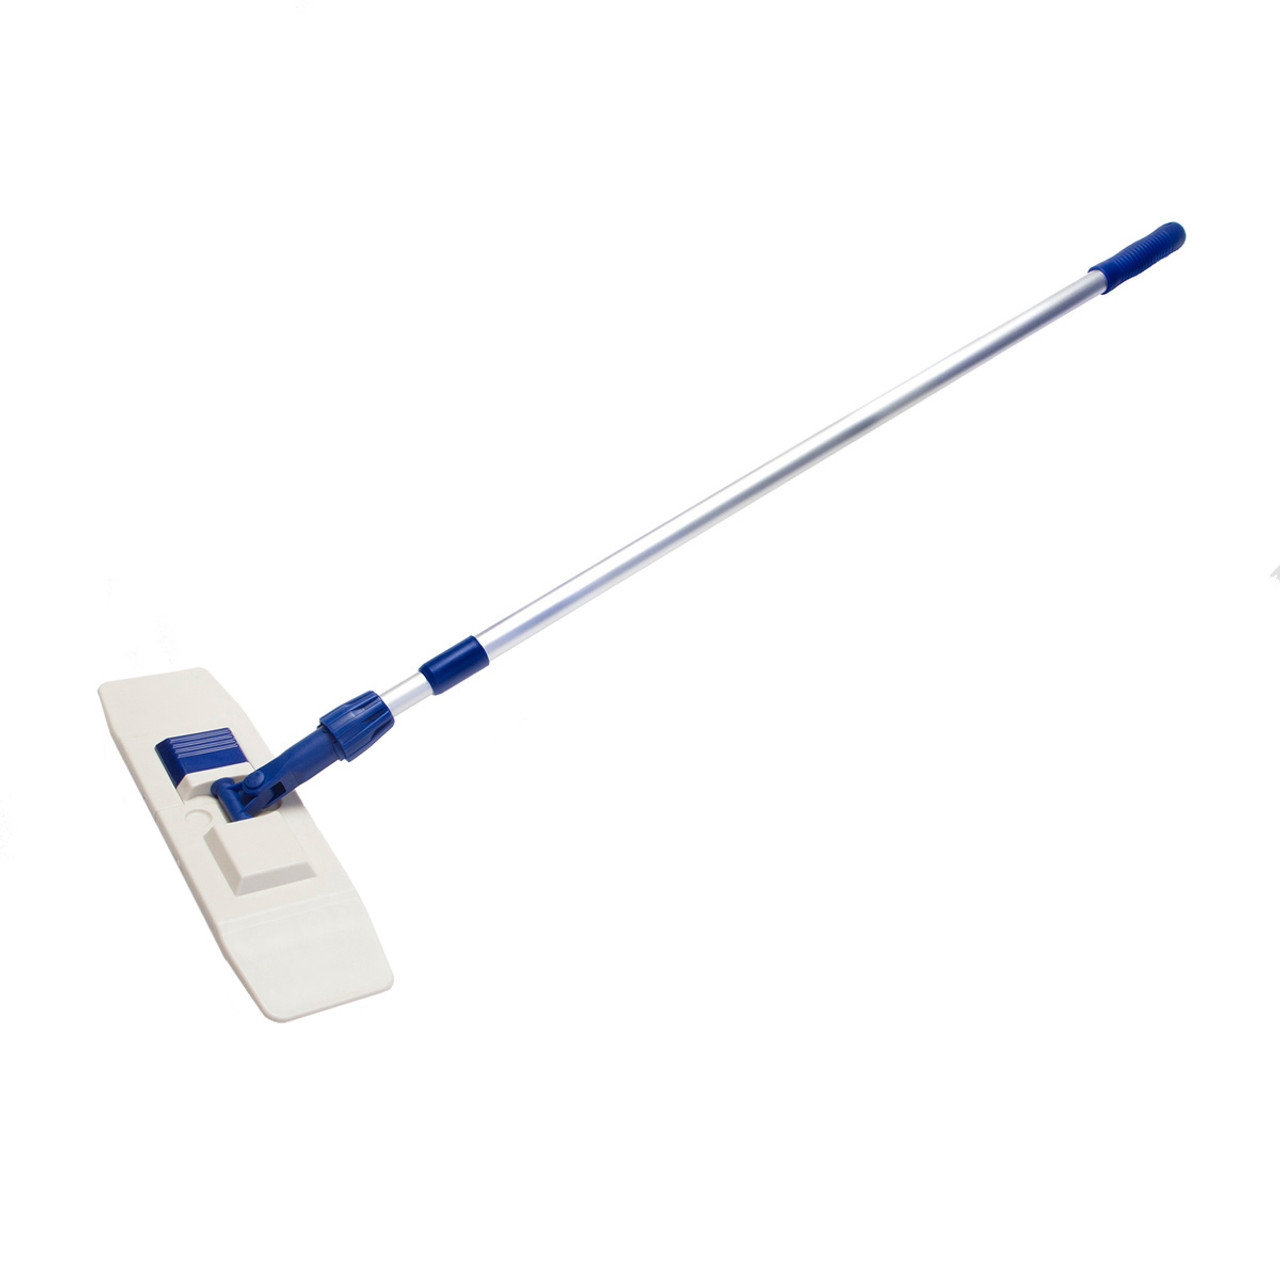 https://cdn11.bigcommerce.com/s-a5uwe4c7wz/images/stencil/1280x1280/products/544/1786/Microfiber-Pocket-Mop-18-Inch-Frame-With-Pole-Entire-Mop__39338.1587142154.jpg?c=1